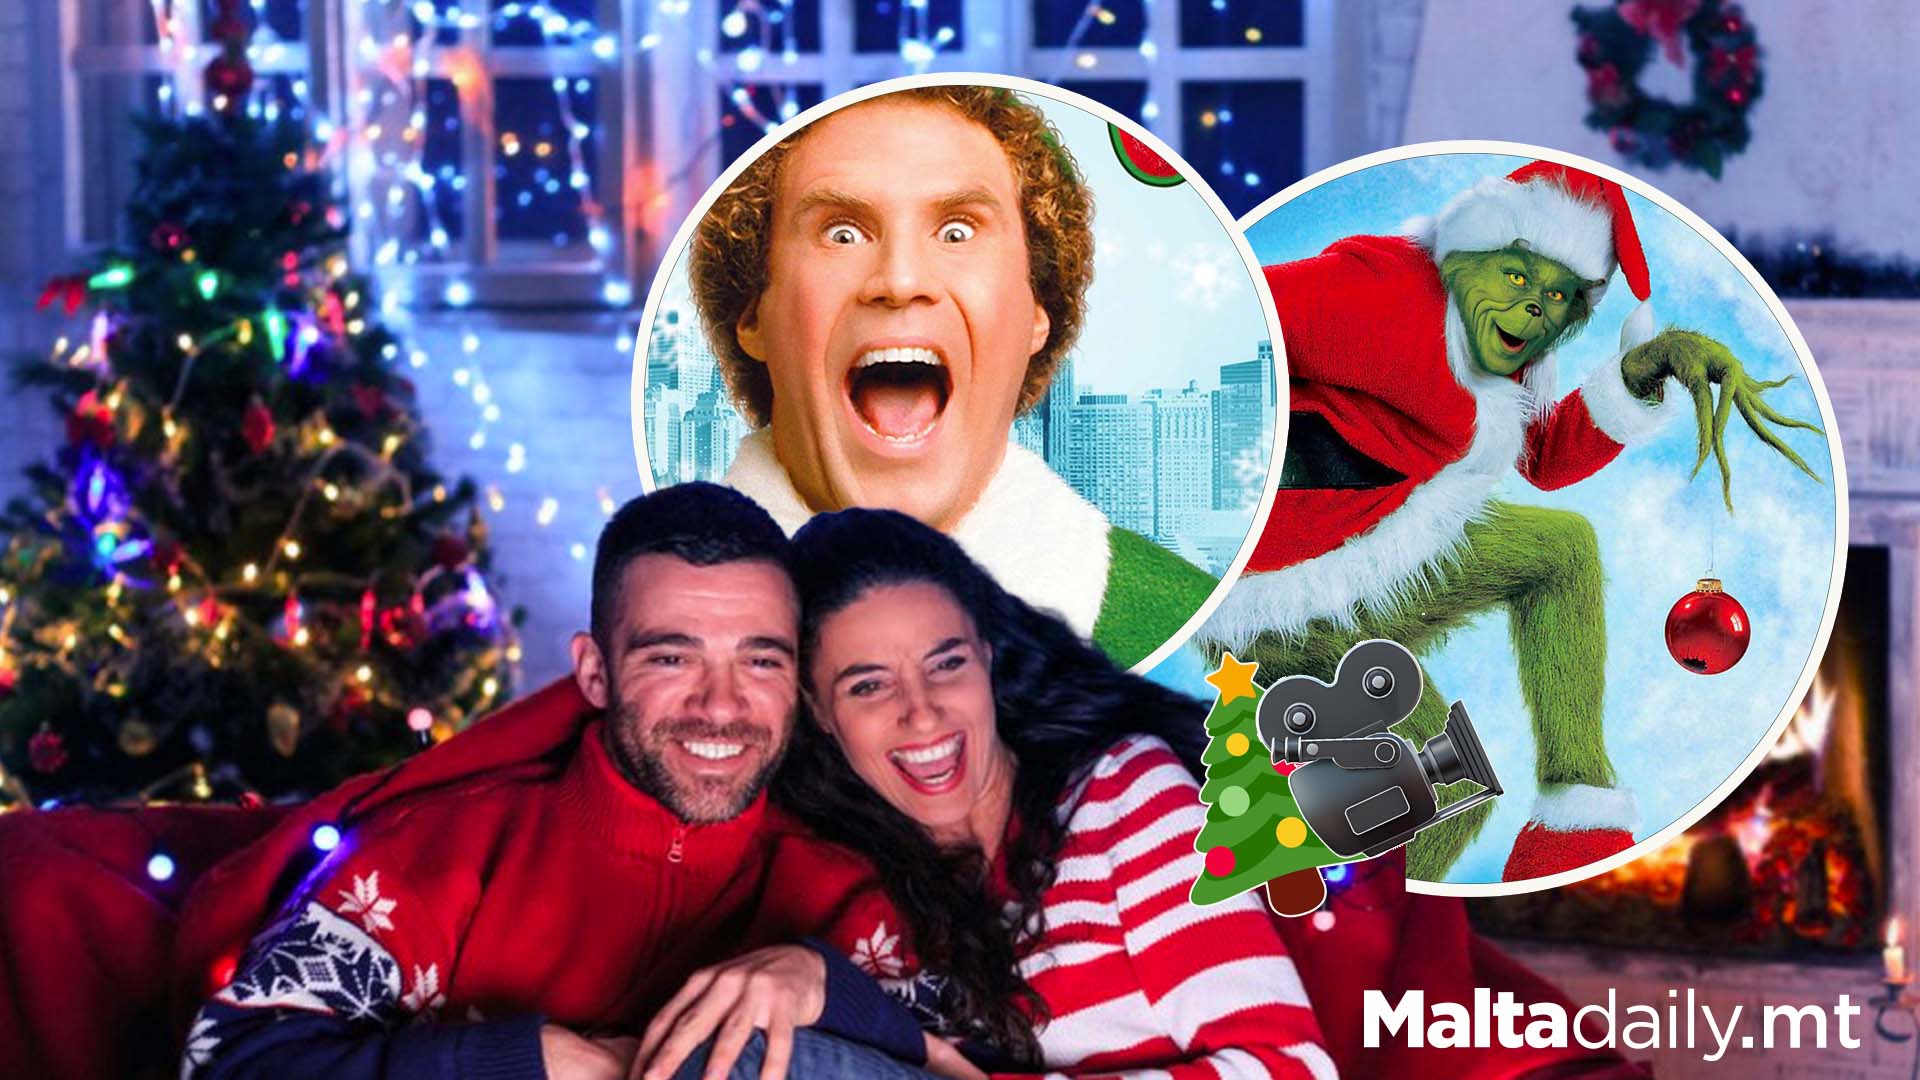 Company Offering $2,000 To Just Watch Christmas Films